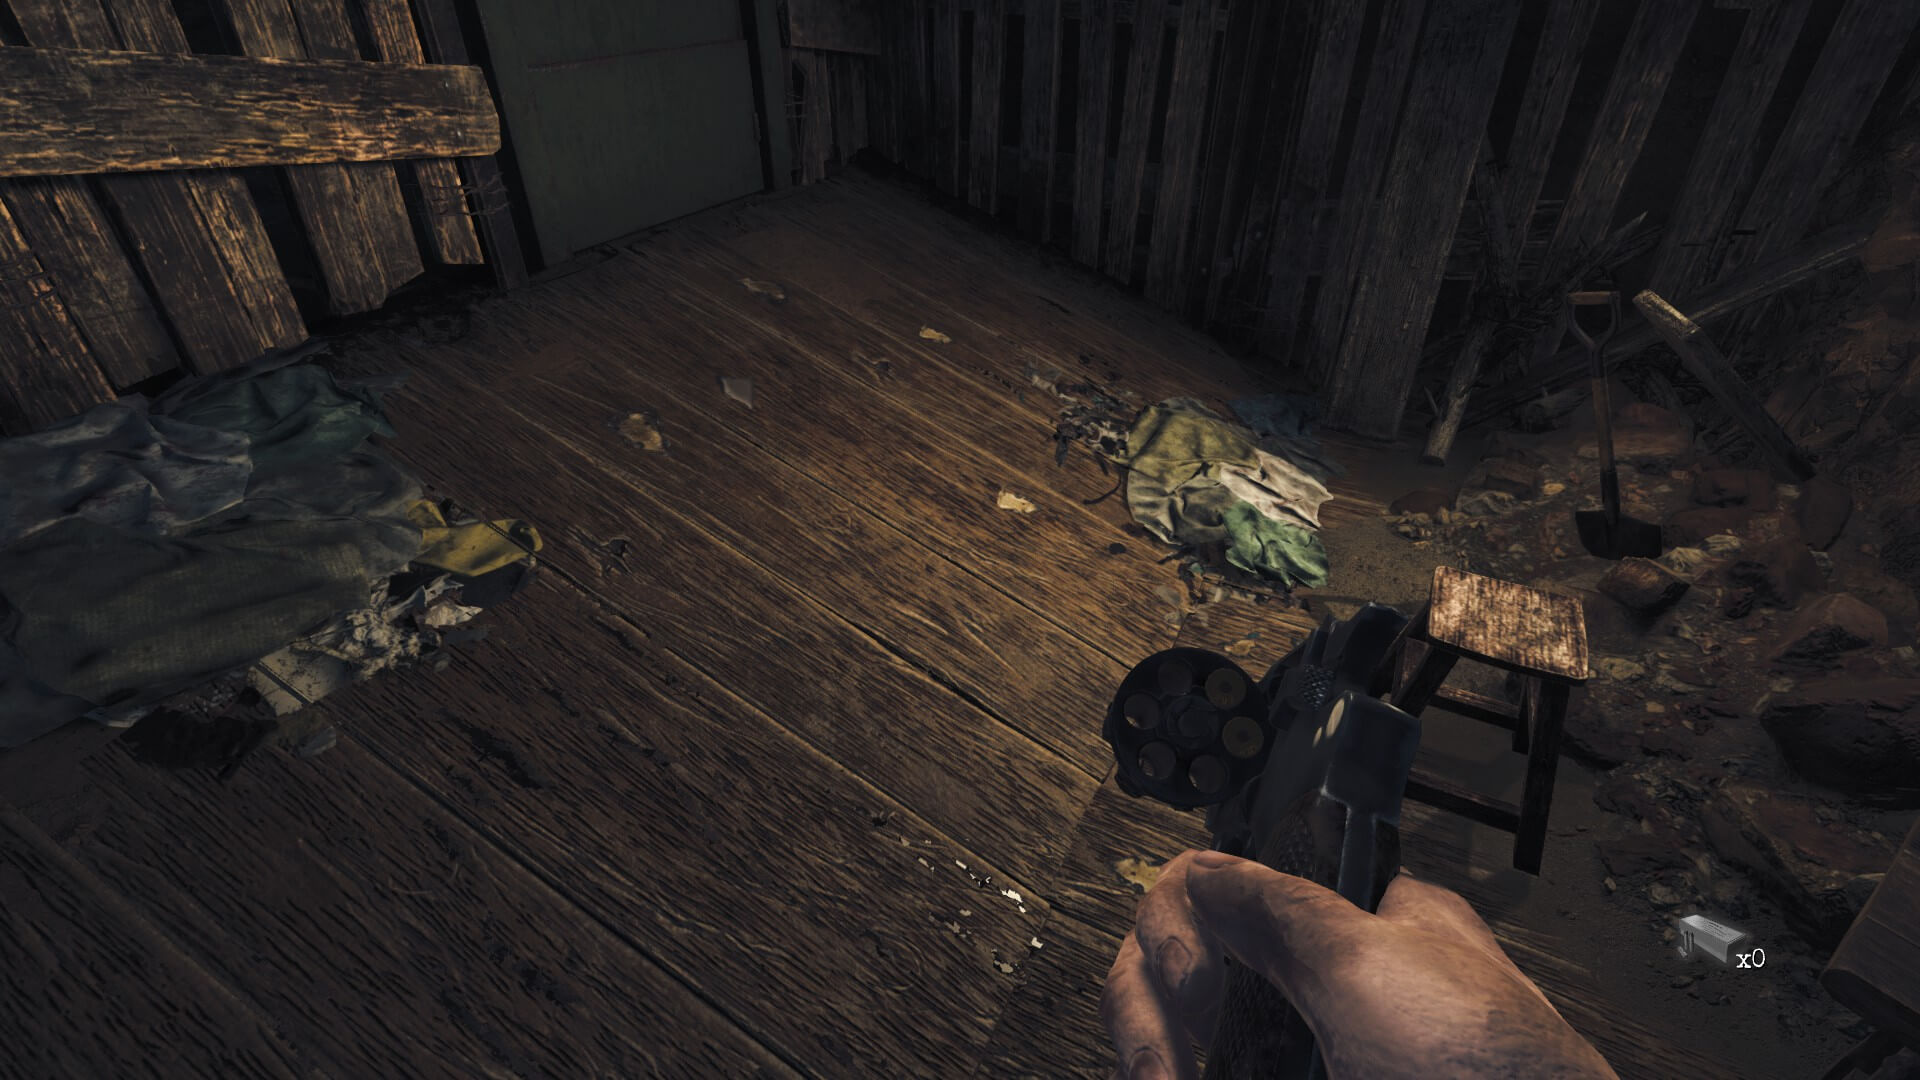 I am checking how many bullets are left in my revolver. several scraps of clothing can be seen on a table with a lonely chair besides it.